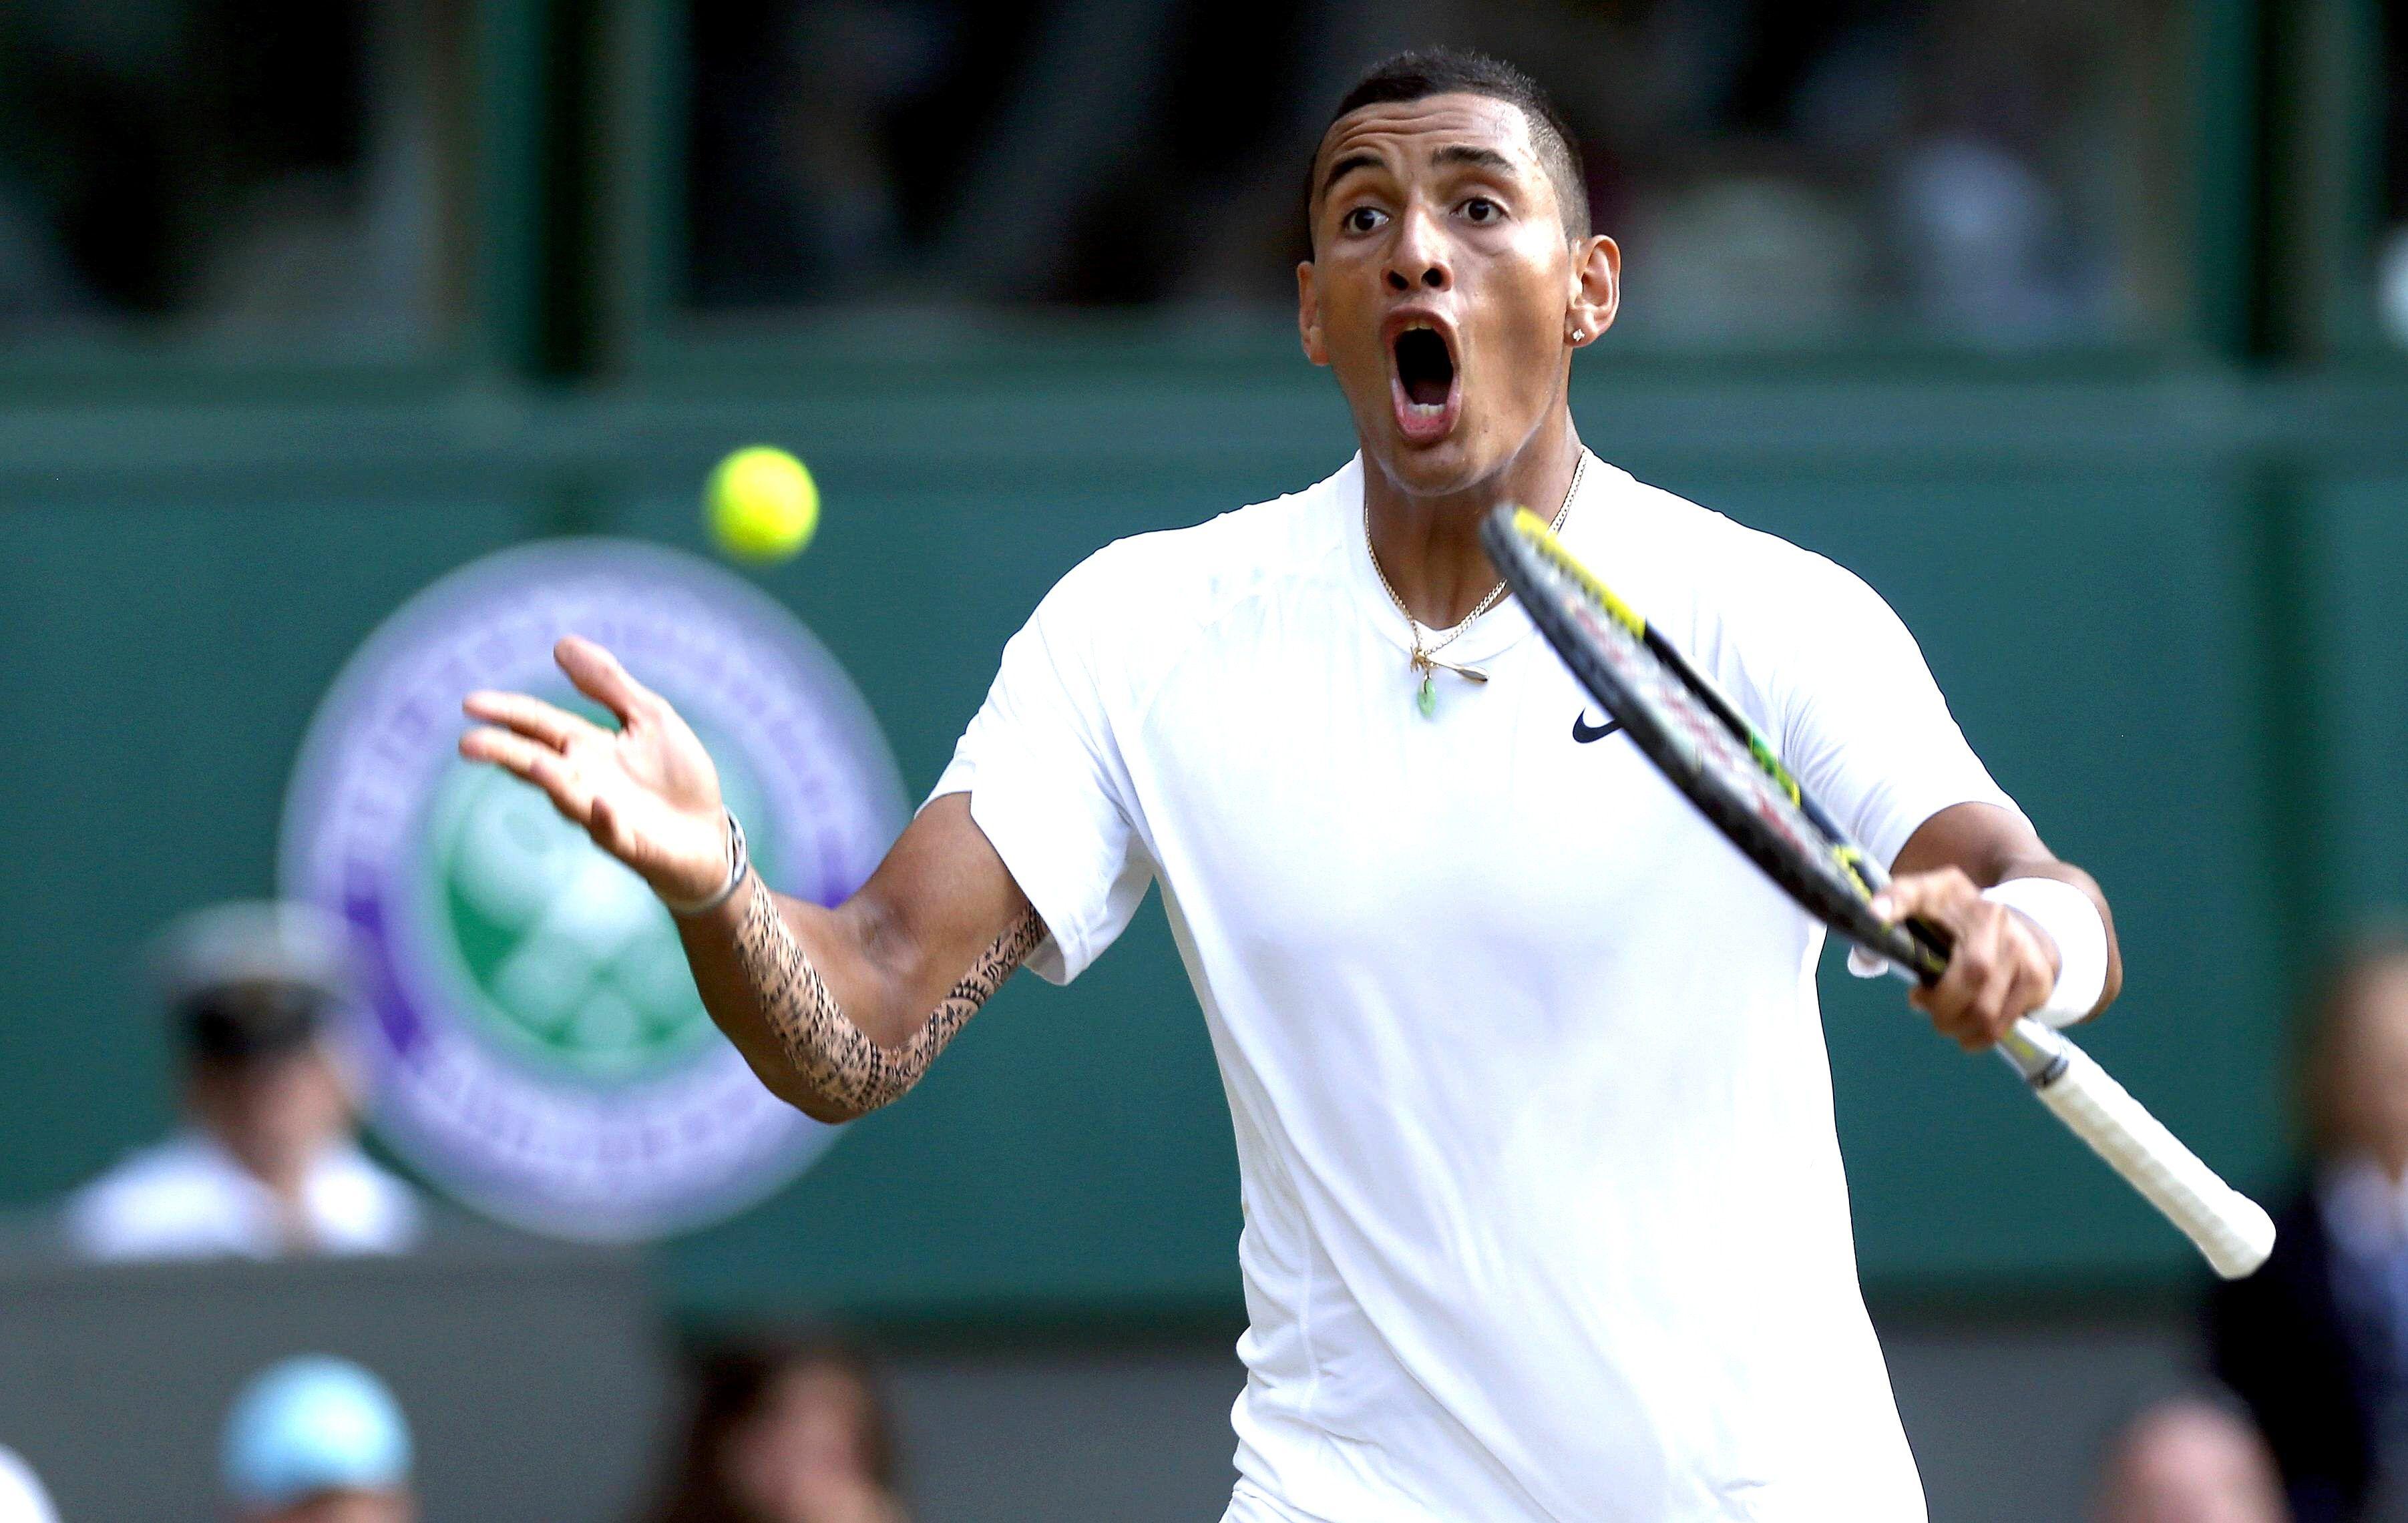 Nick Kyrgios a character? Maybe, but he's also a pain in